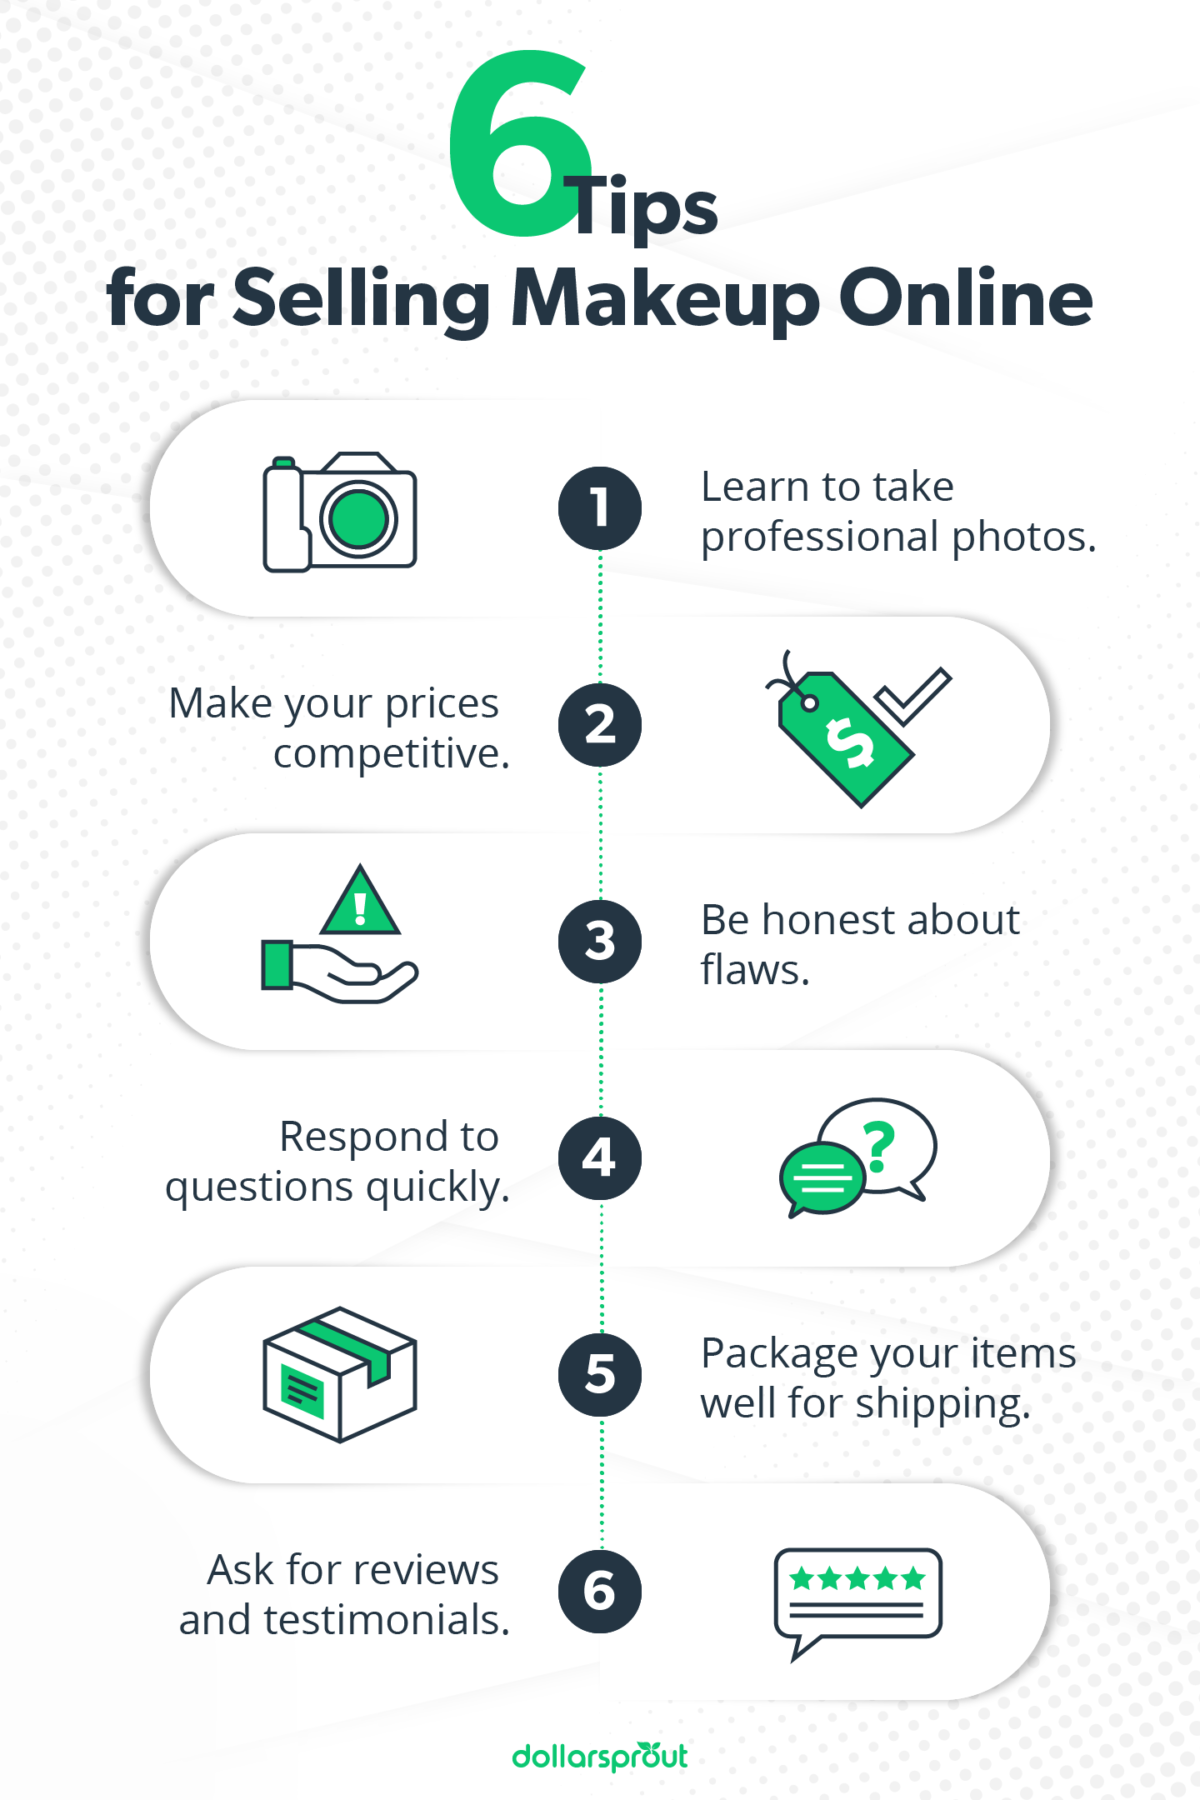 Tips for Selling Makeup Online